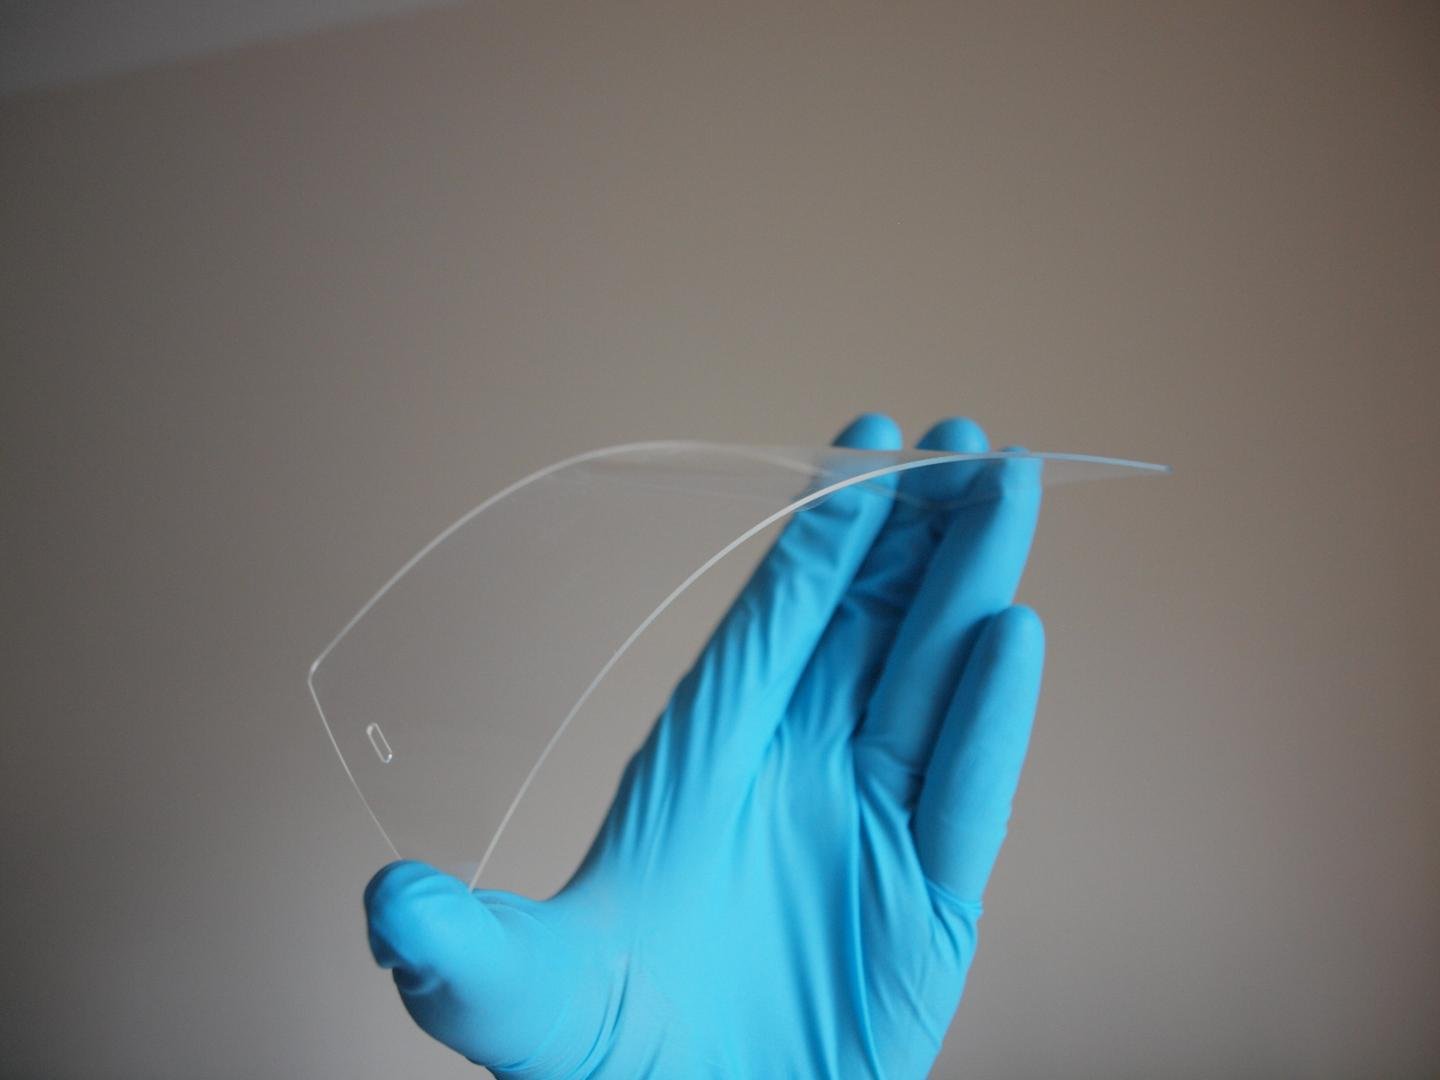 Dr Matthew Large, University of Sussex, flexes a screen made from acrylic plastic coated in silver nanowires and grapheme to illustrate the kind of touch screens that can potentially be produced using the new approach. Source: Dr. Matthew Large